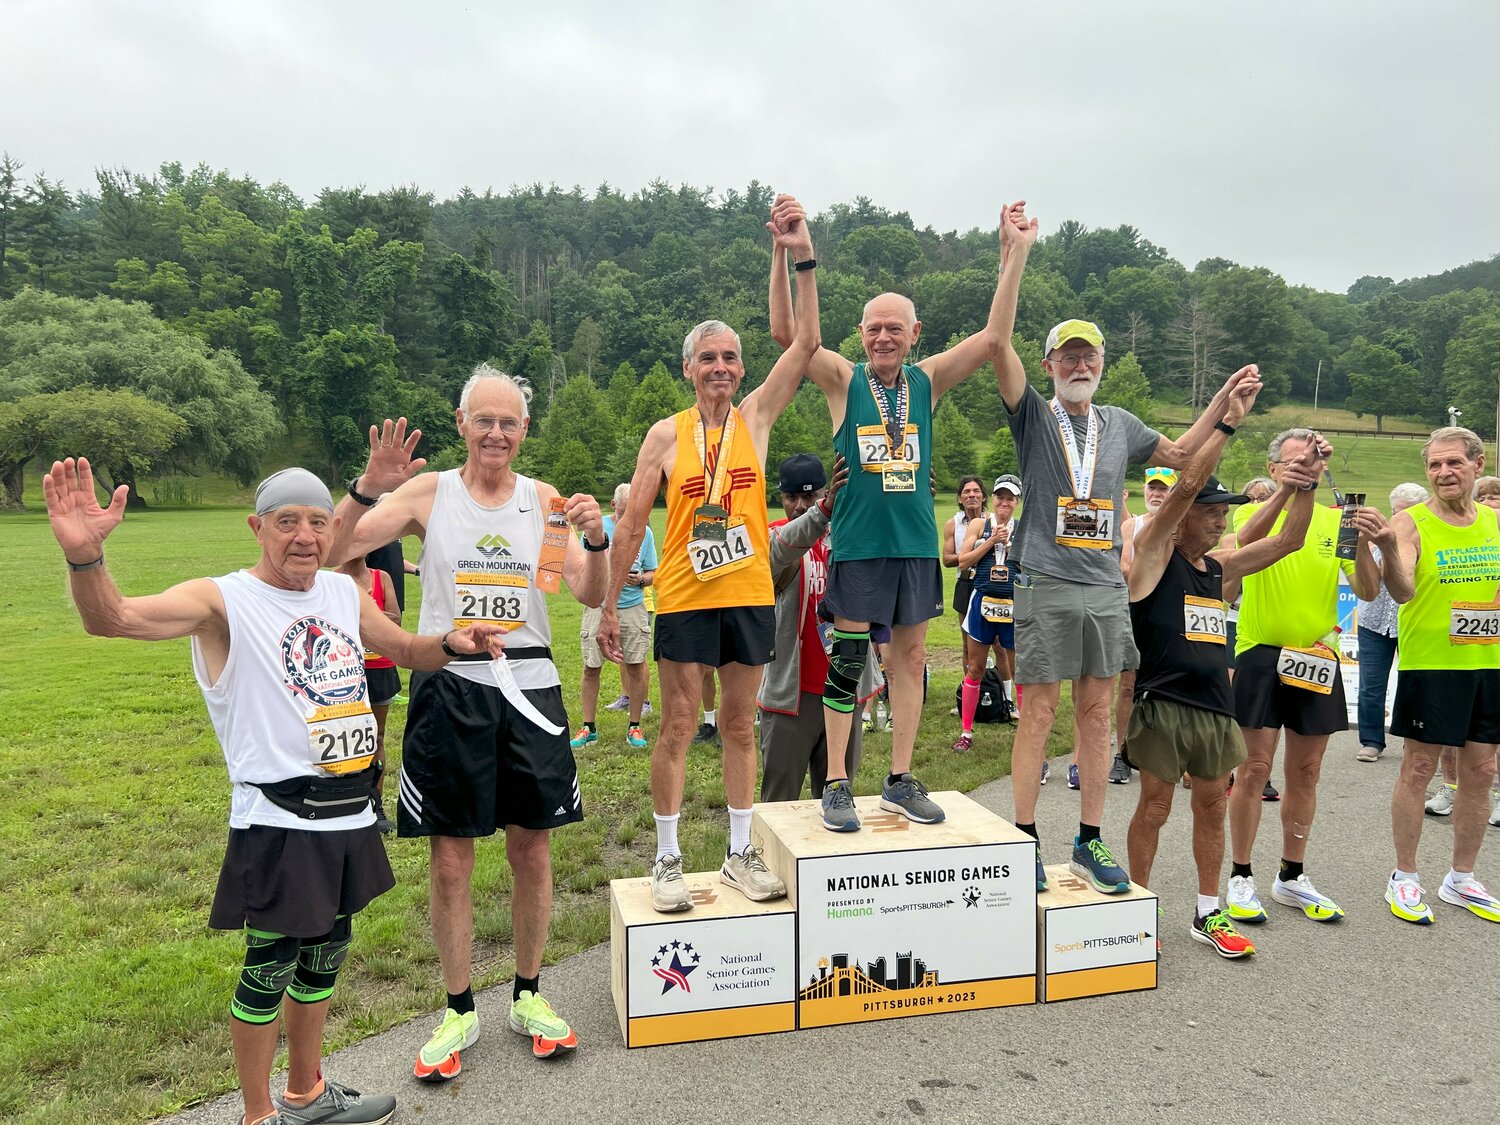 Al Berryman (in yellow Zia shirt) was second in the men’s age 80-84 10K Road Race in the 2023 National Senior Games July 7-18 in Pittsburgh, Pennsylvania. He finished with a time of just over 59:30. To Berryman’s left is Eric Yarborough of North Carolina, who won the race with a time just under 54:32. To Yarborough’s left is third-place finisher Franklin Crow of California, who finished with a time of just under 59:42.